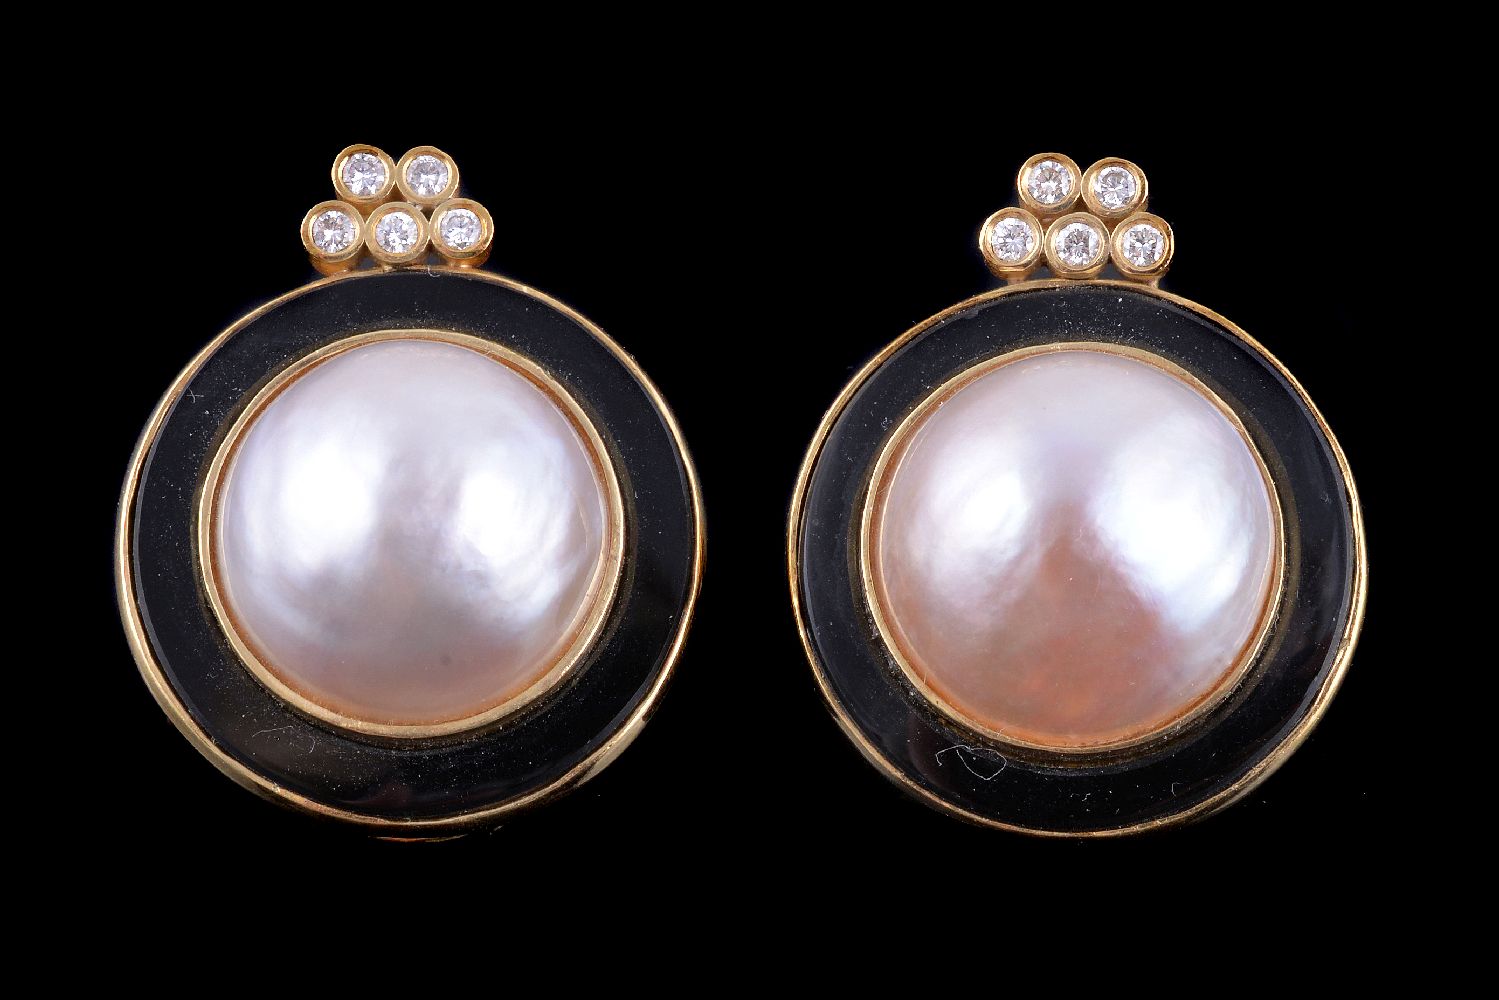 A pair of mabé pearl, diamond and onyx earrings